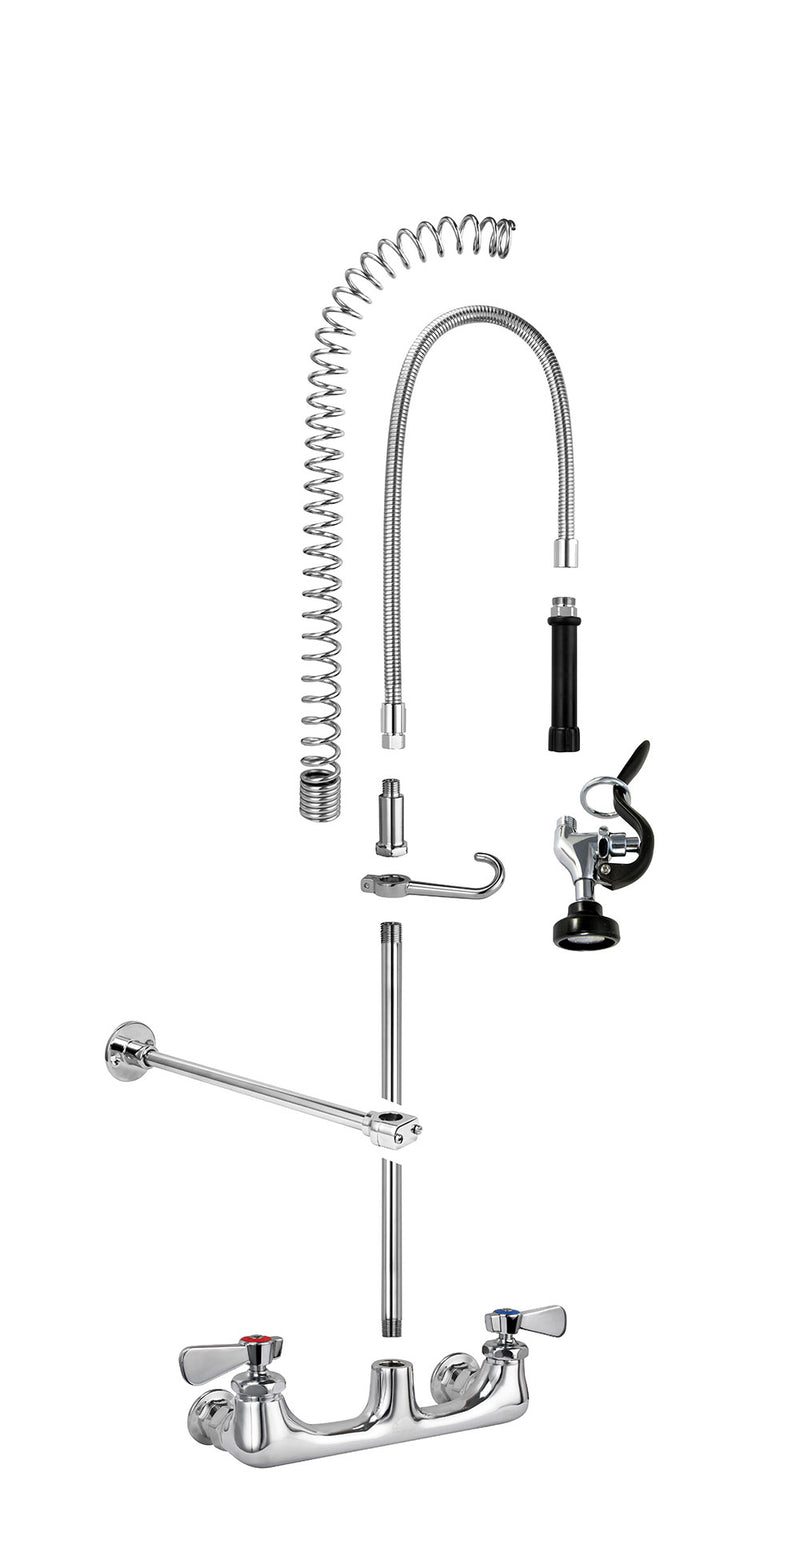 AA Faucet 8-Inch Wall-Mount Pre-Rinse Commercial Duty Faucet (AA-988GT)